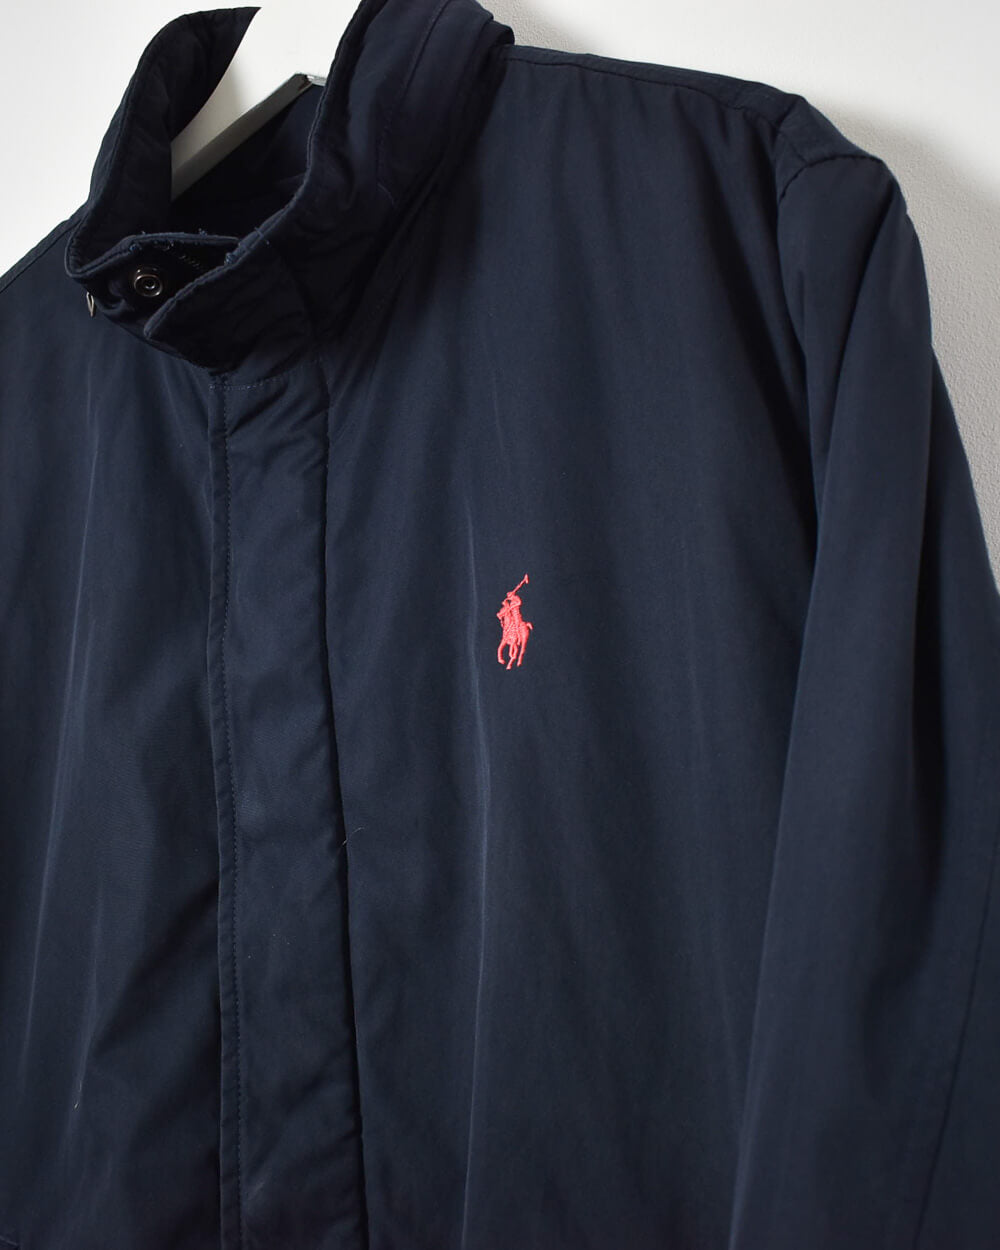 Ralph Lauren Fleece Lined Jacket - Large - Domno Vintage 90s, 80s, 00s Retro and Vintage Clothing 